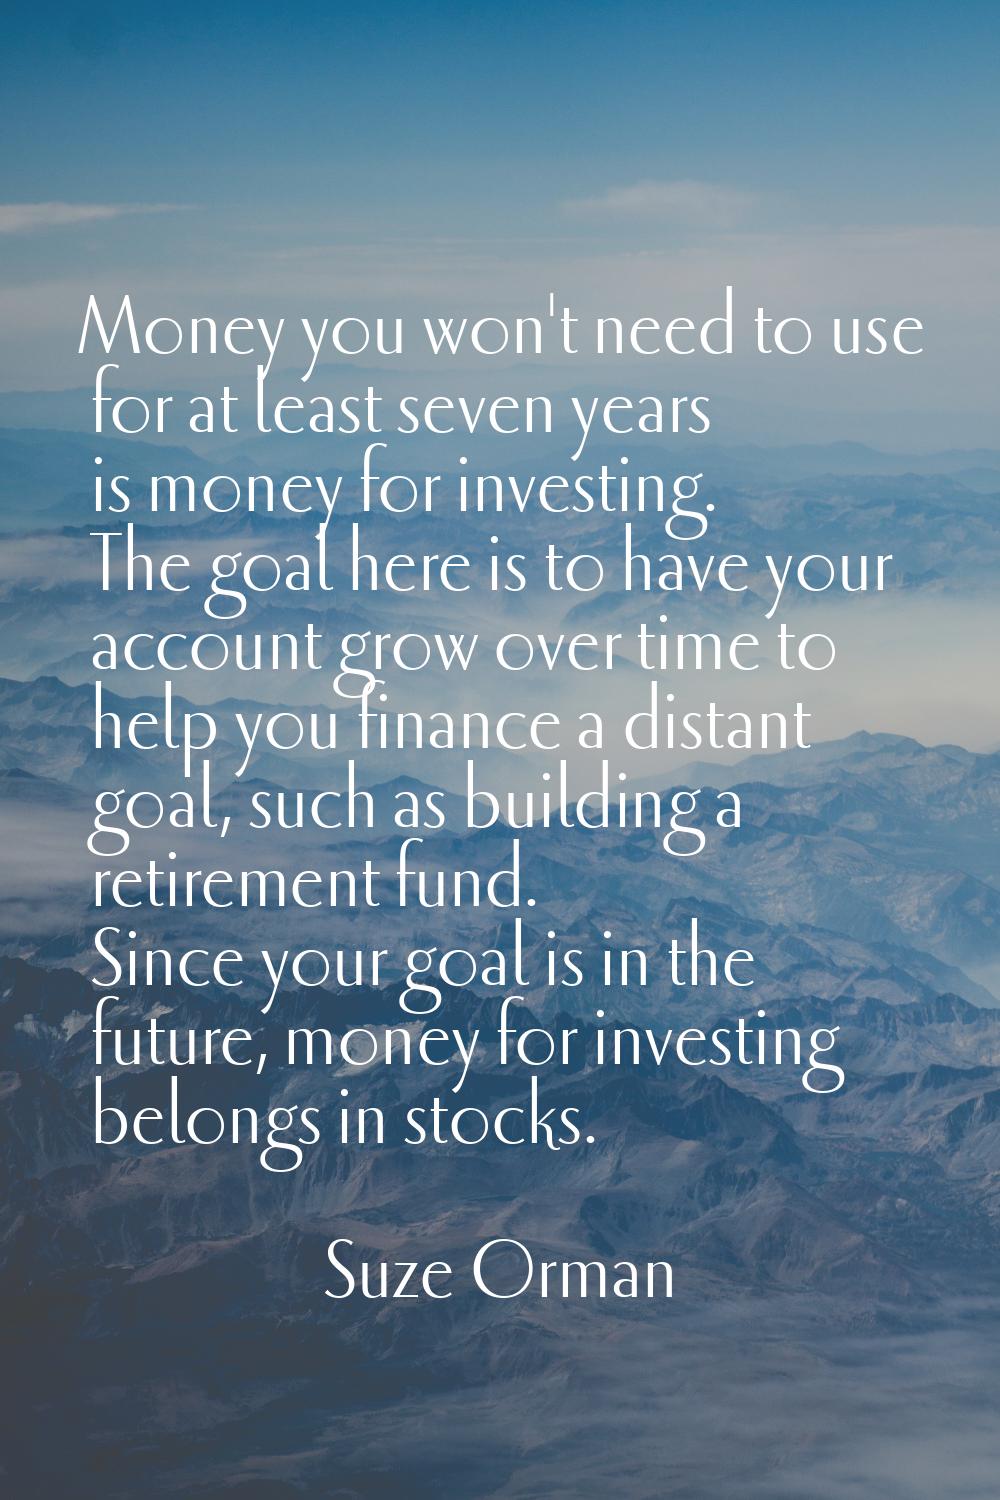 Money you won't need to use for at least seven years is money for investing. The goal here is to ha